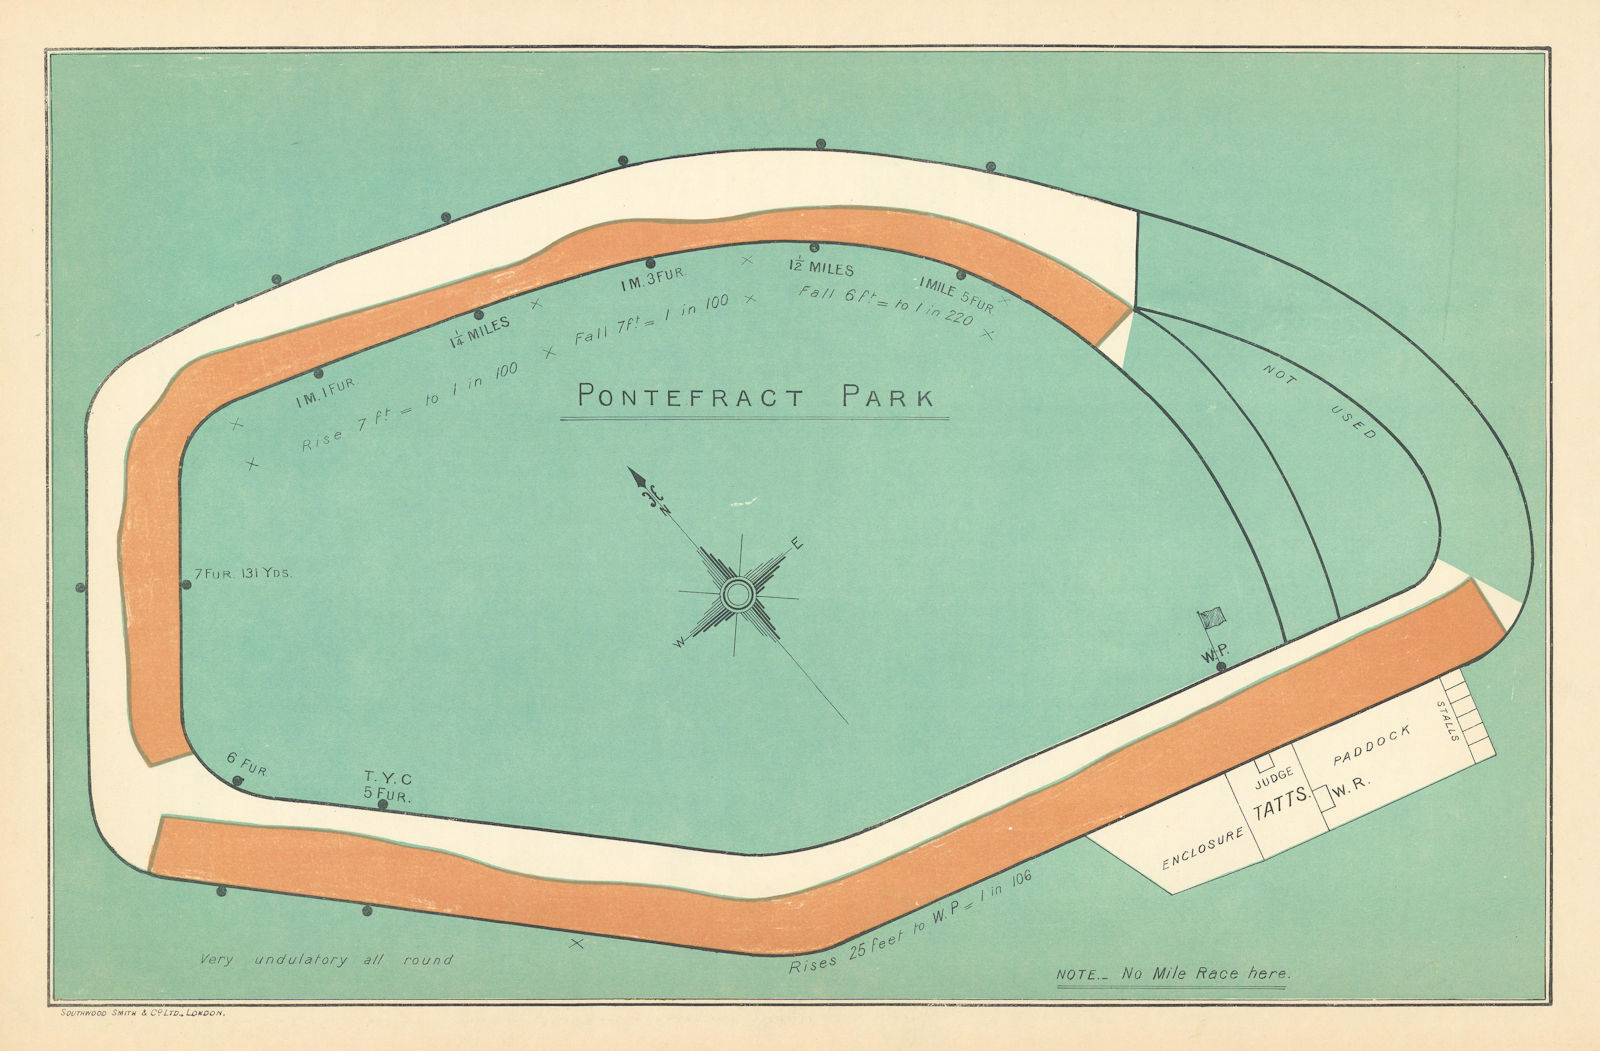 Associate Product Pontefract Park racecourse, Yorkshire. BAYLES 1903 old antique map plan chart